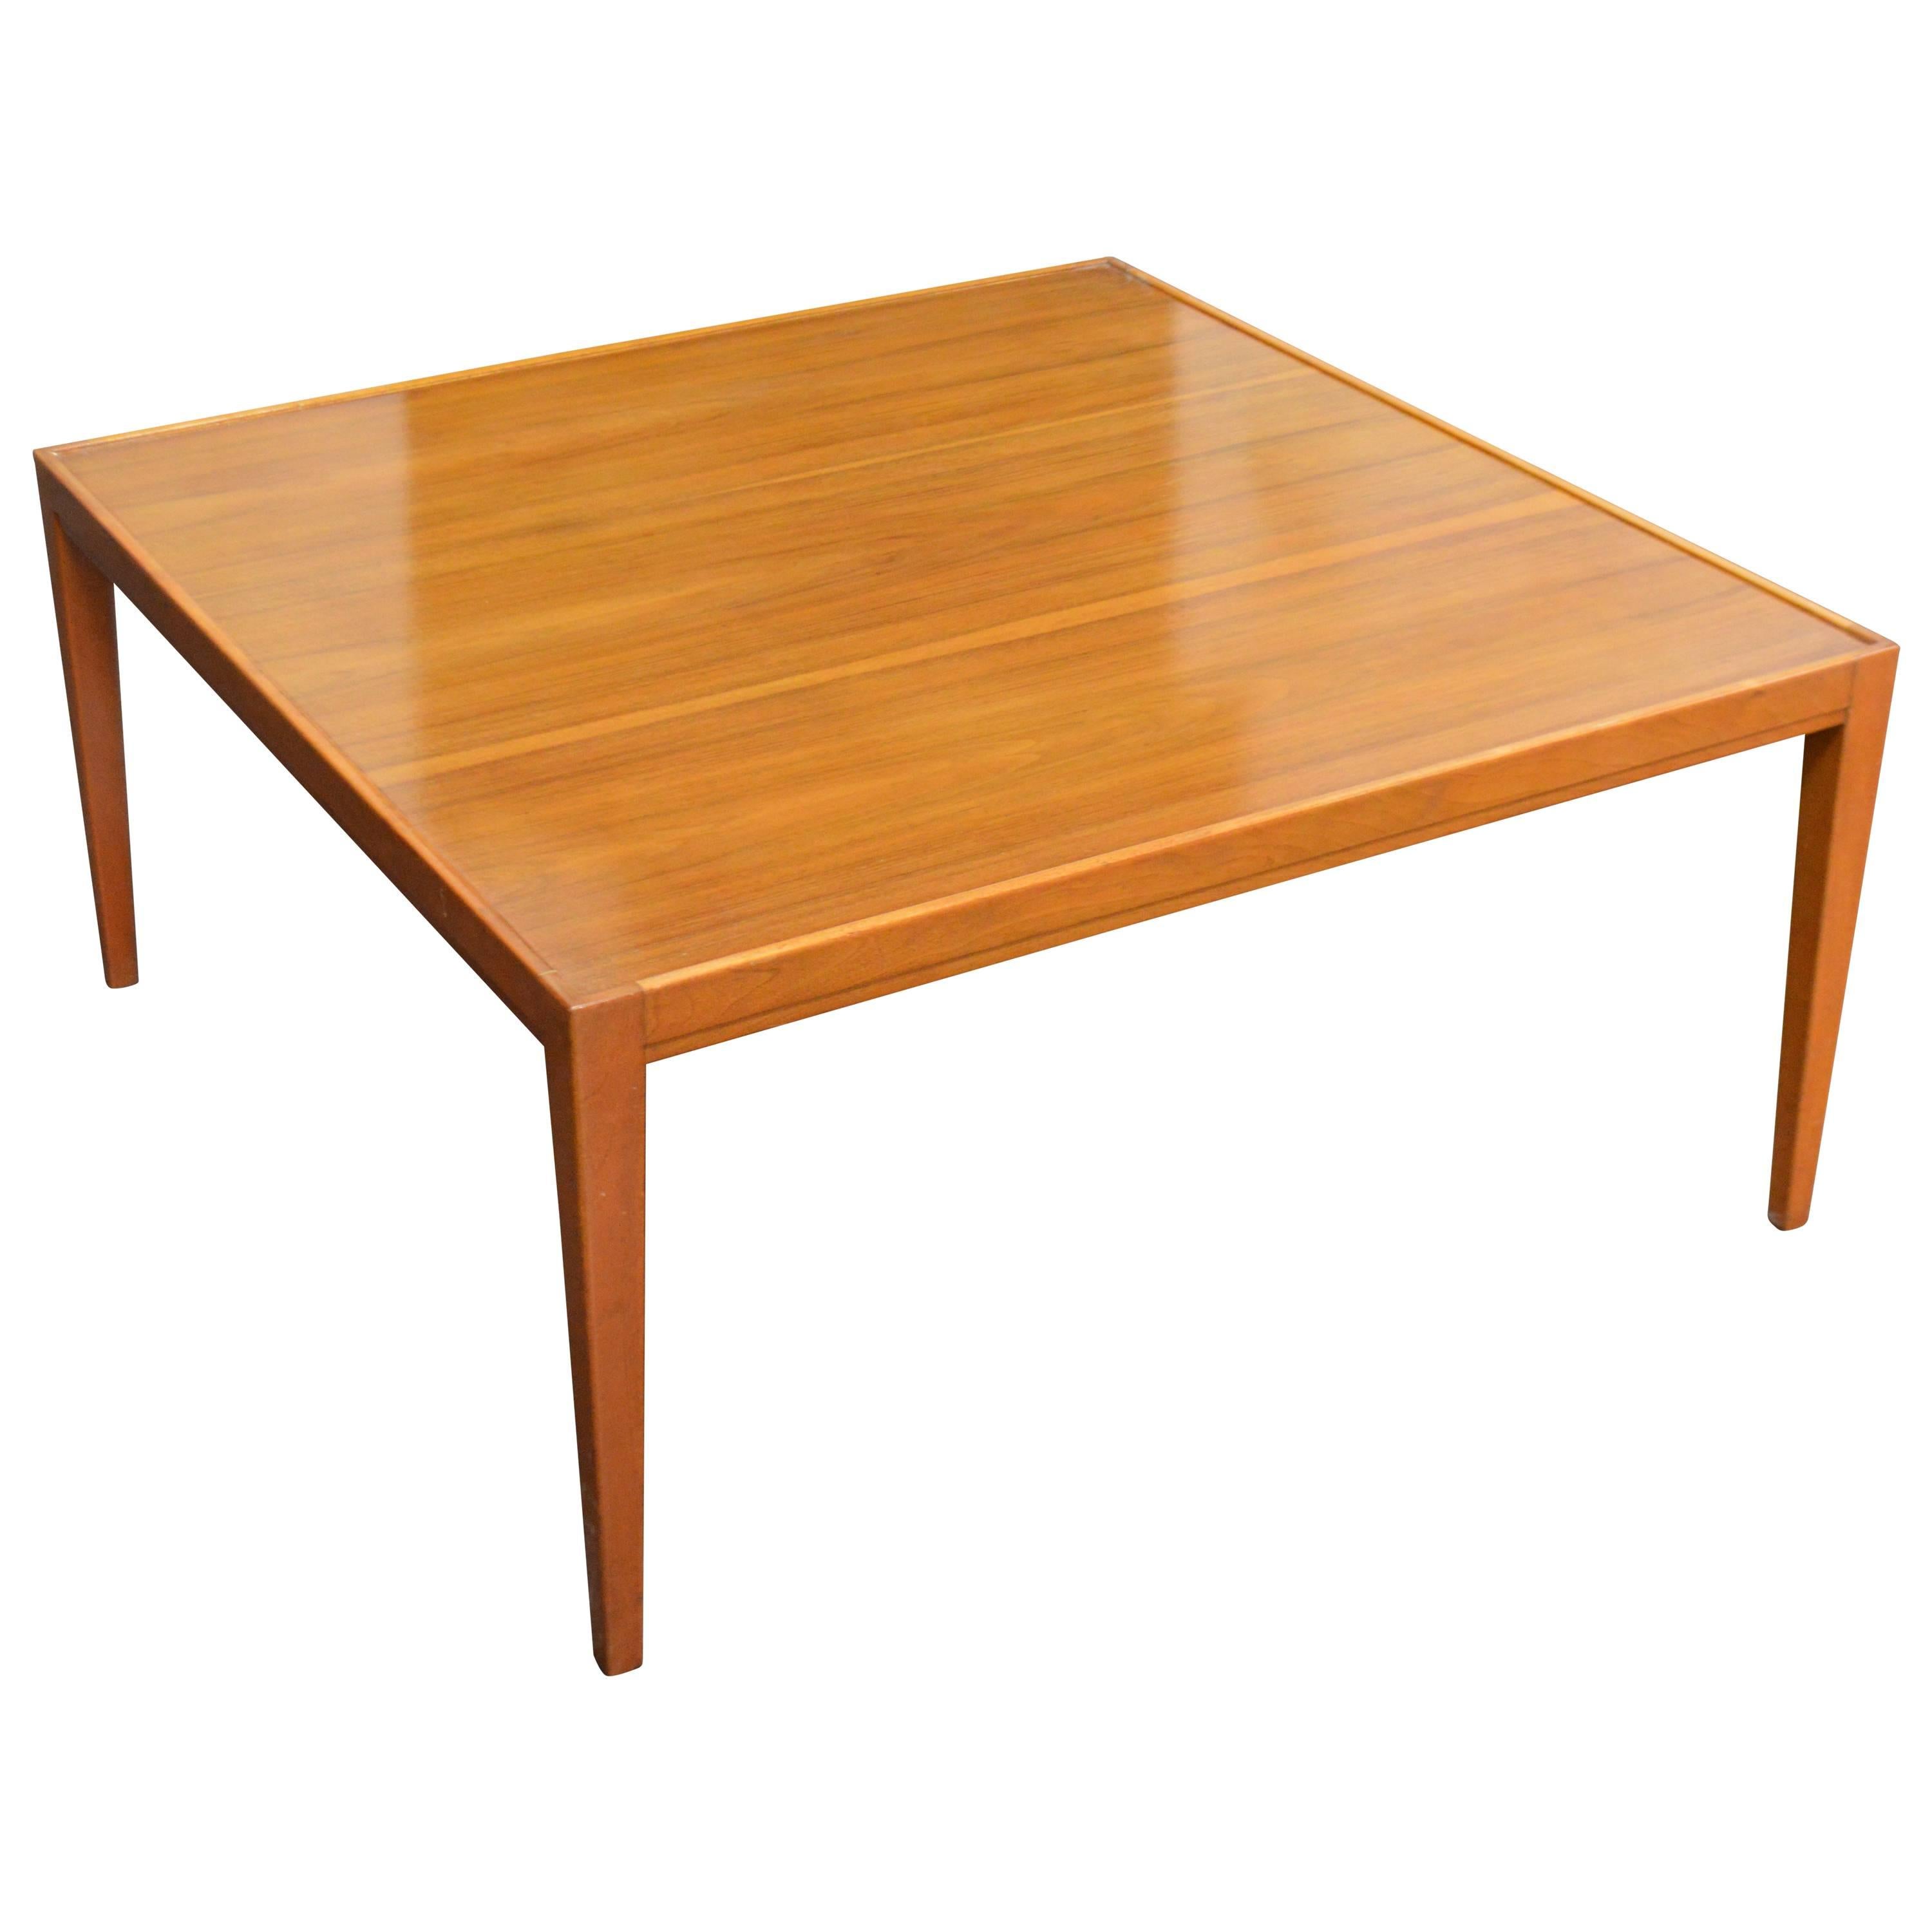 Handsome Square Art Moderne Coffee Table For Sale